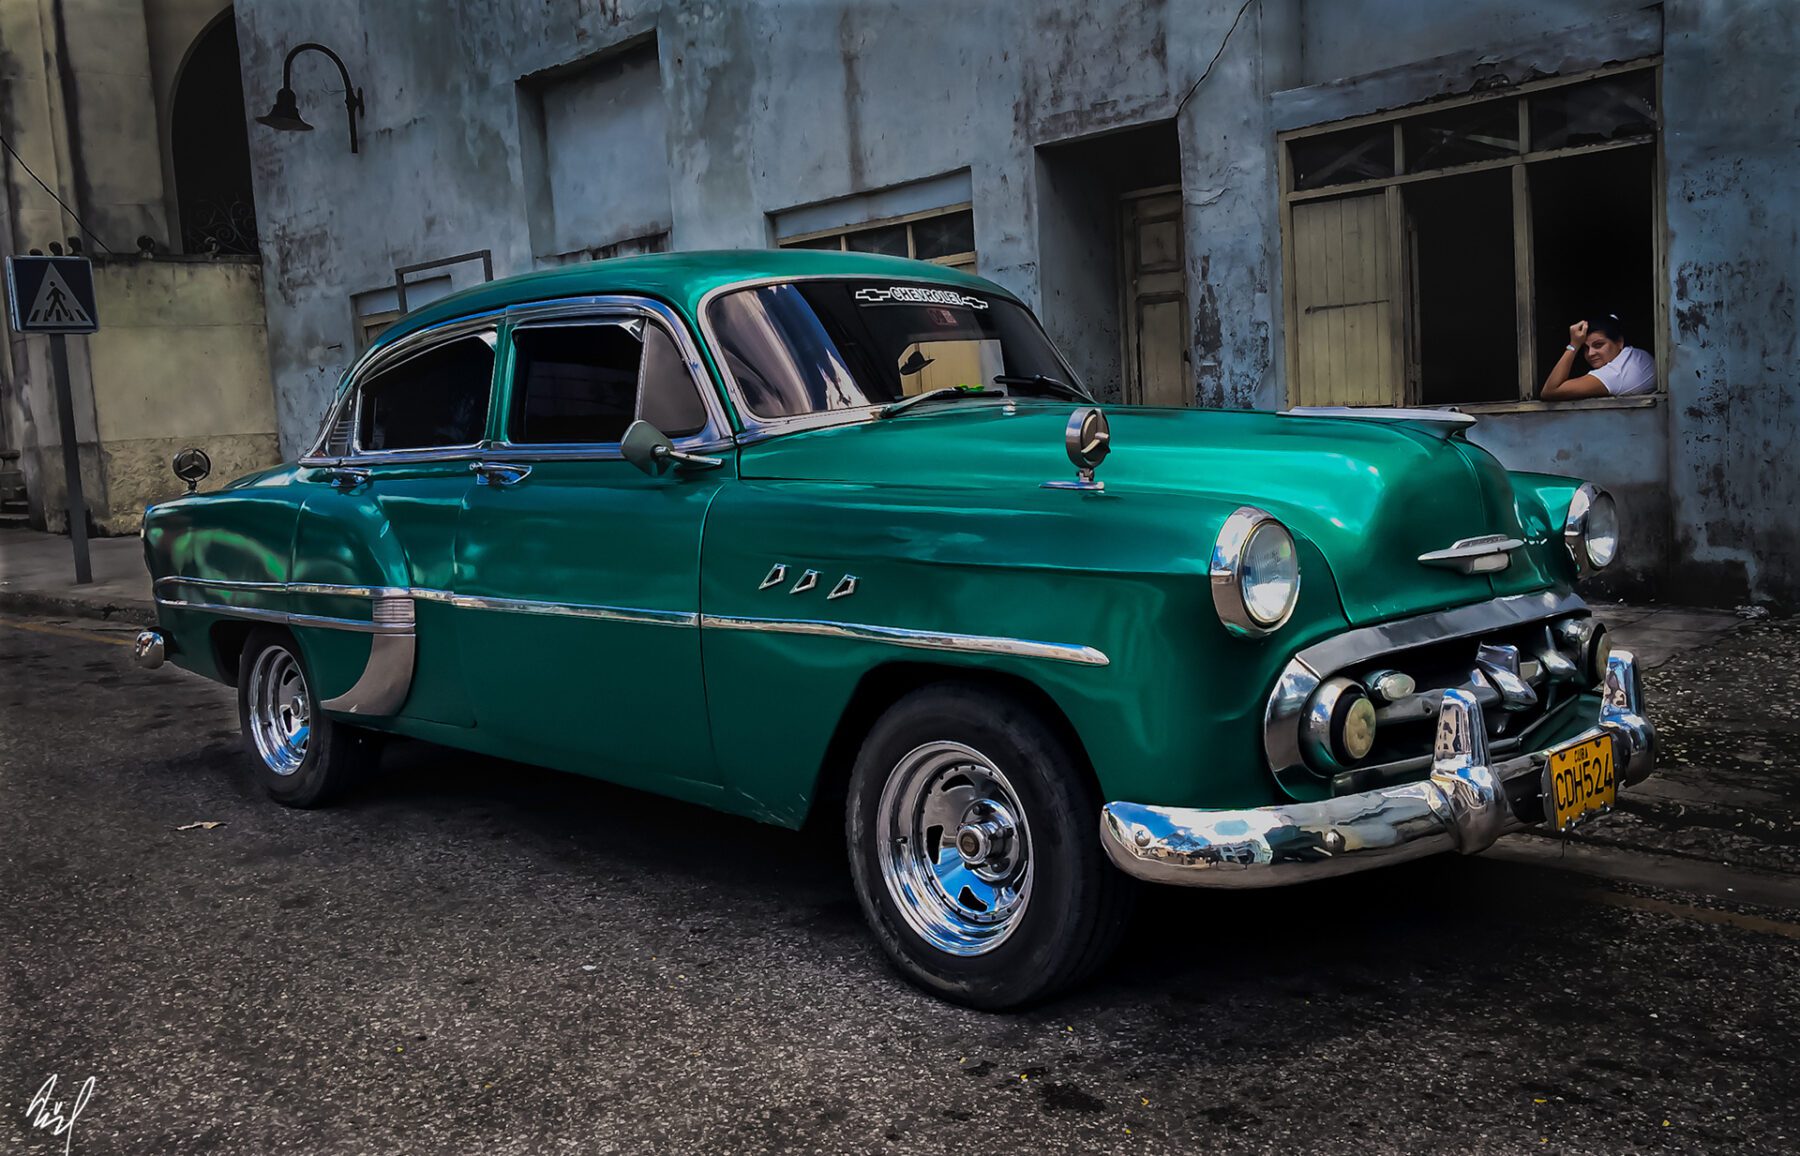 An old green Cuba is parked in front of a building.